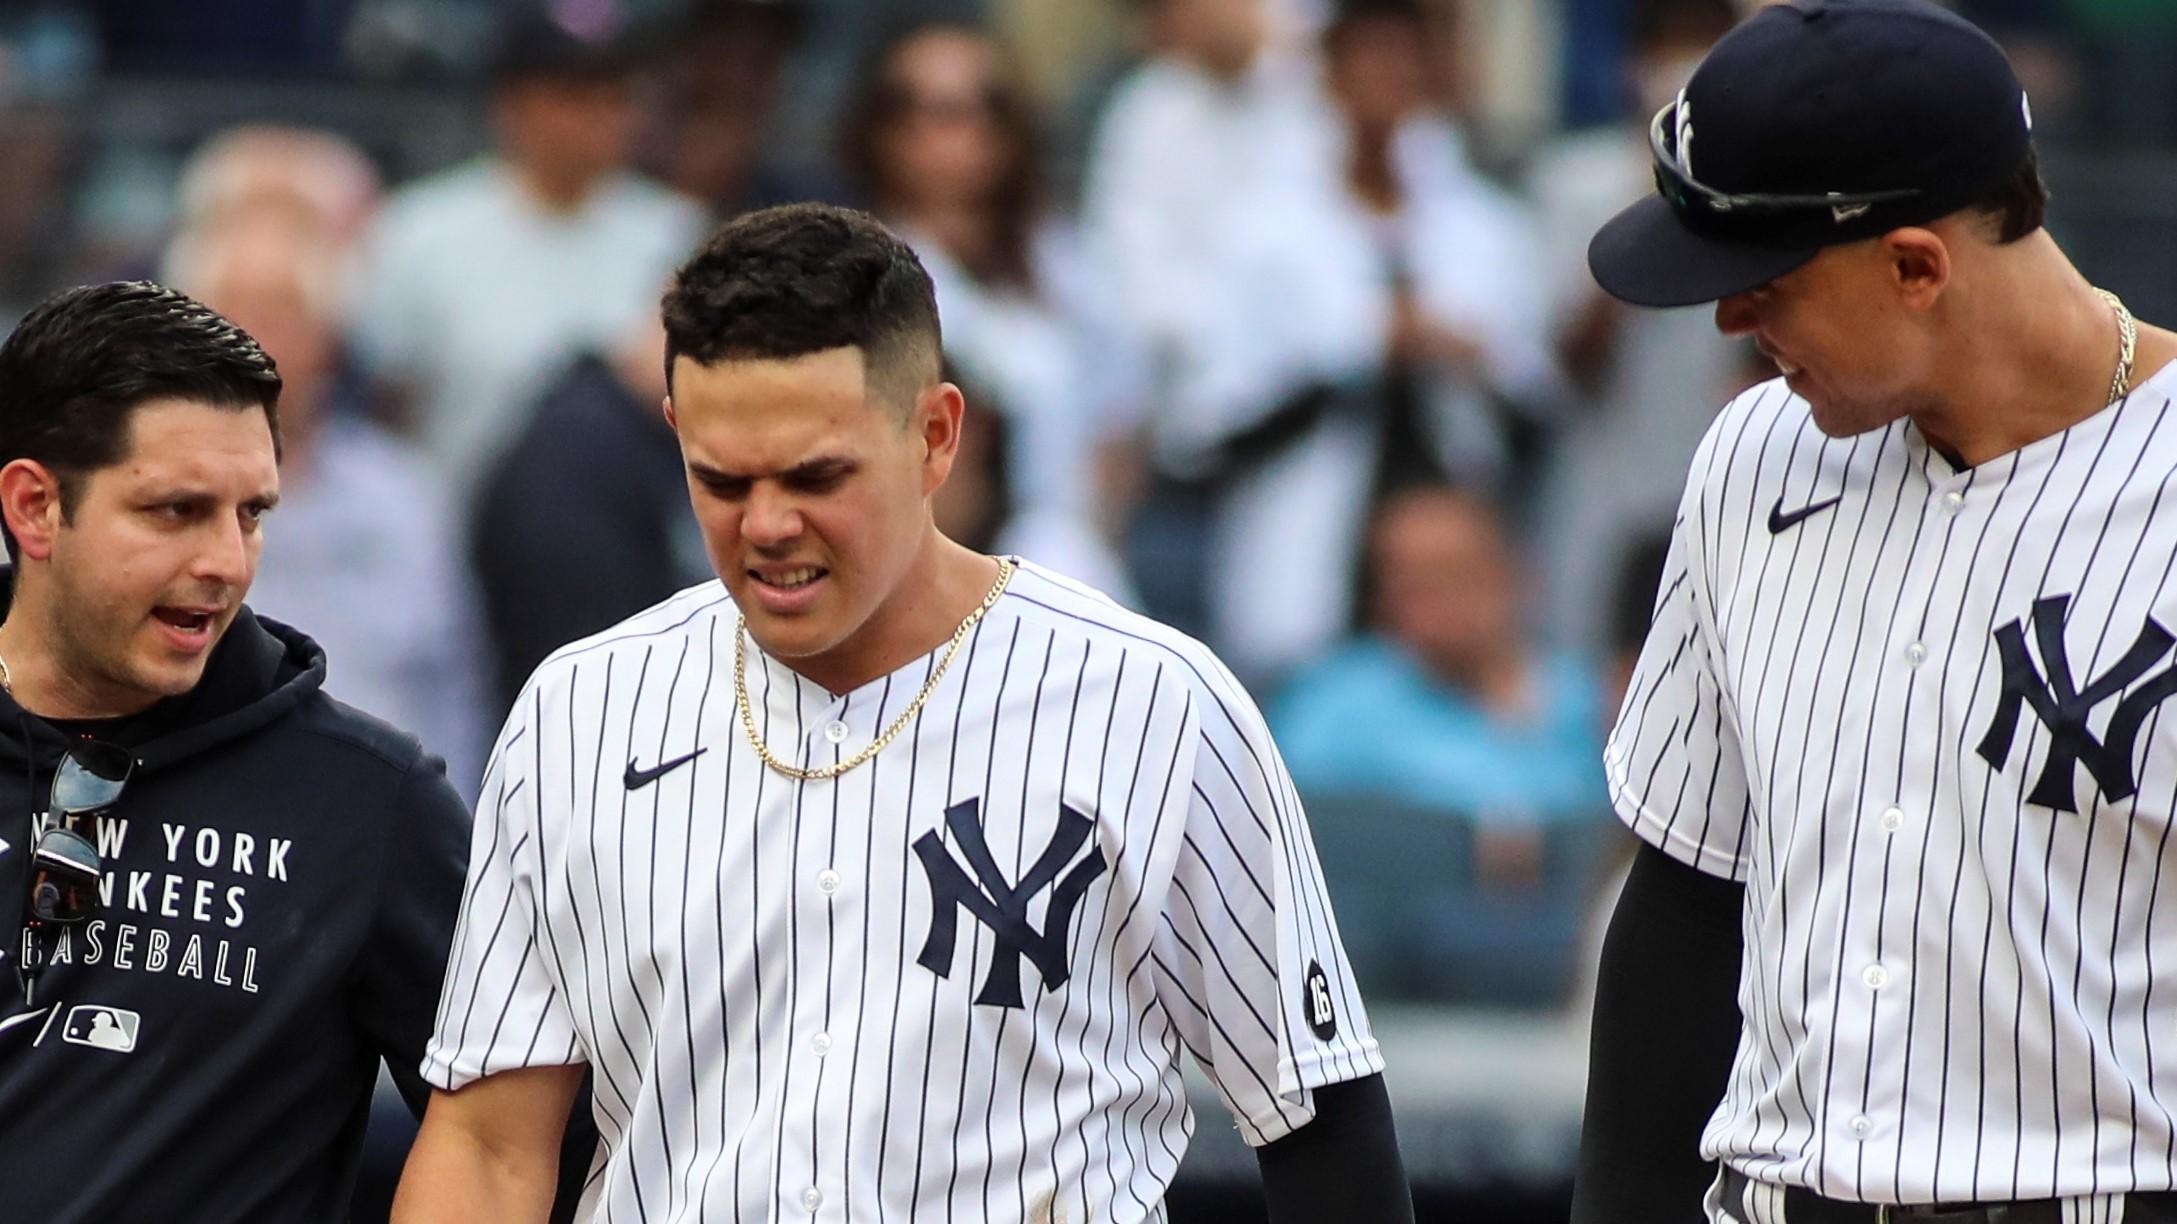 Oct 3, 2021; Bronx, New York, USA; New York Yankees shortstop Gio Urshela (29) walks back into the dugout with right fielder Aaron Judge (99) after falling into the dugout of the Tampa Bay Rays to make the the third out in the sixth inning at Yankee Stadium. Mandatory Credit: Wendell Cruz-USA TODAY Sports / Wendell Cruz-USA TODAY Sports